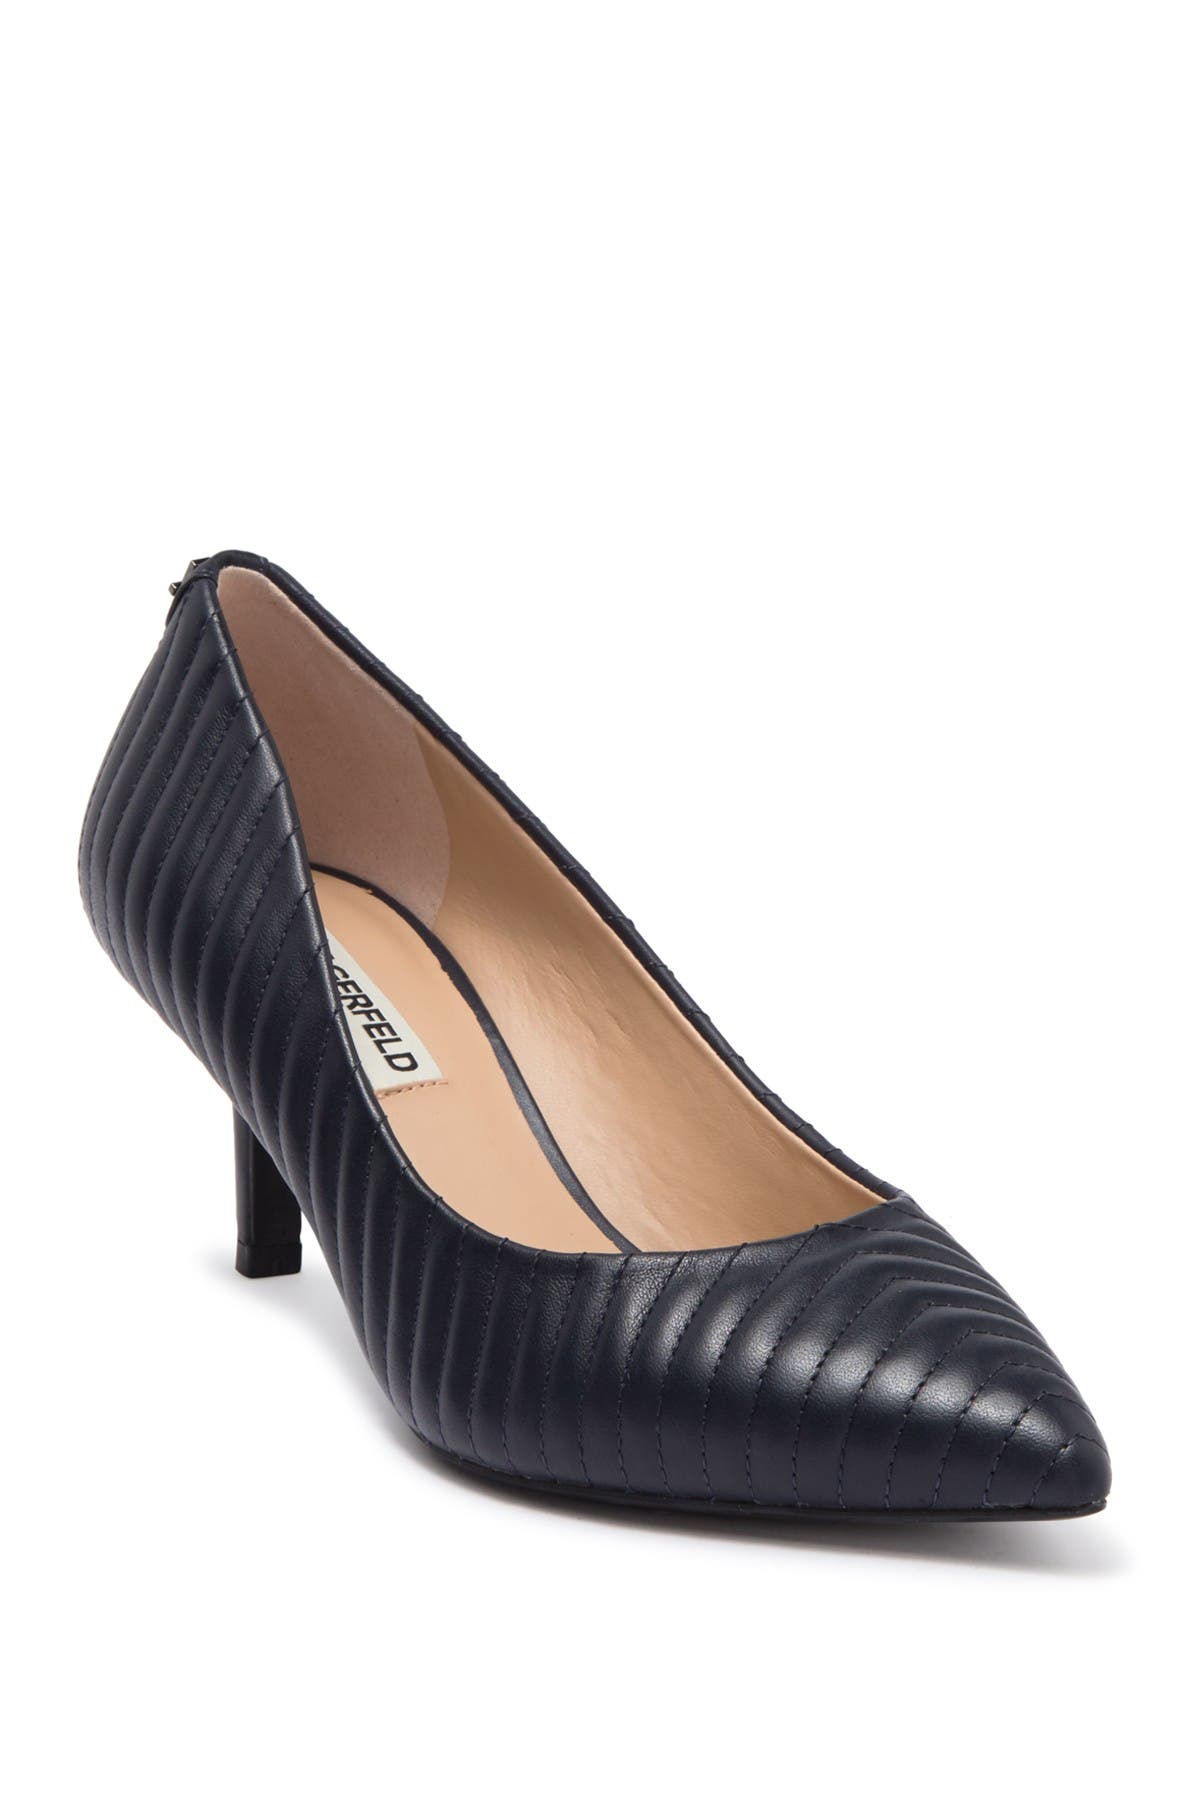 Karl Lagerfeld Rosette Quilted Pointed Toe Pump In Dark Blue7